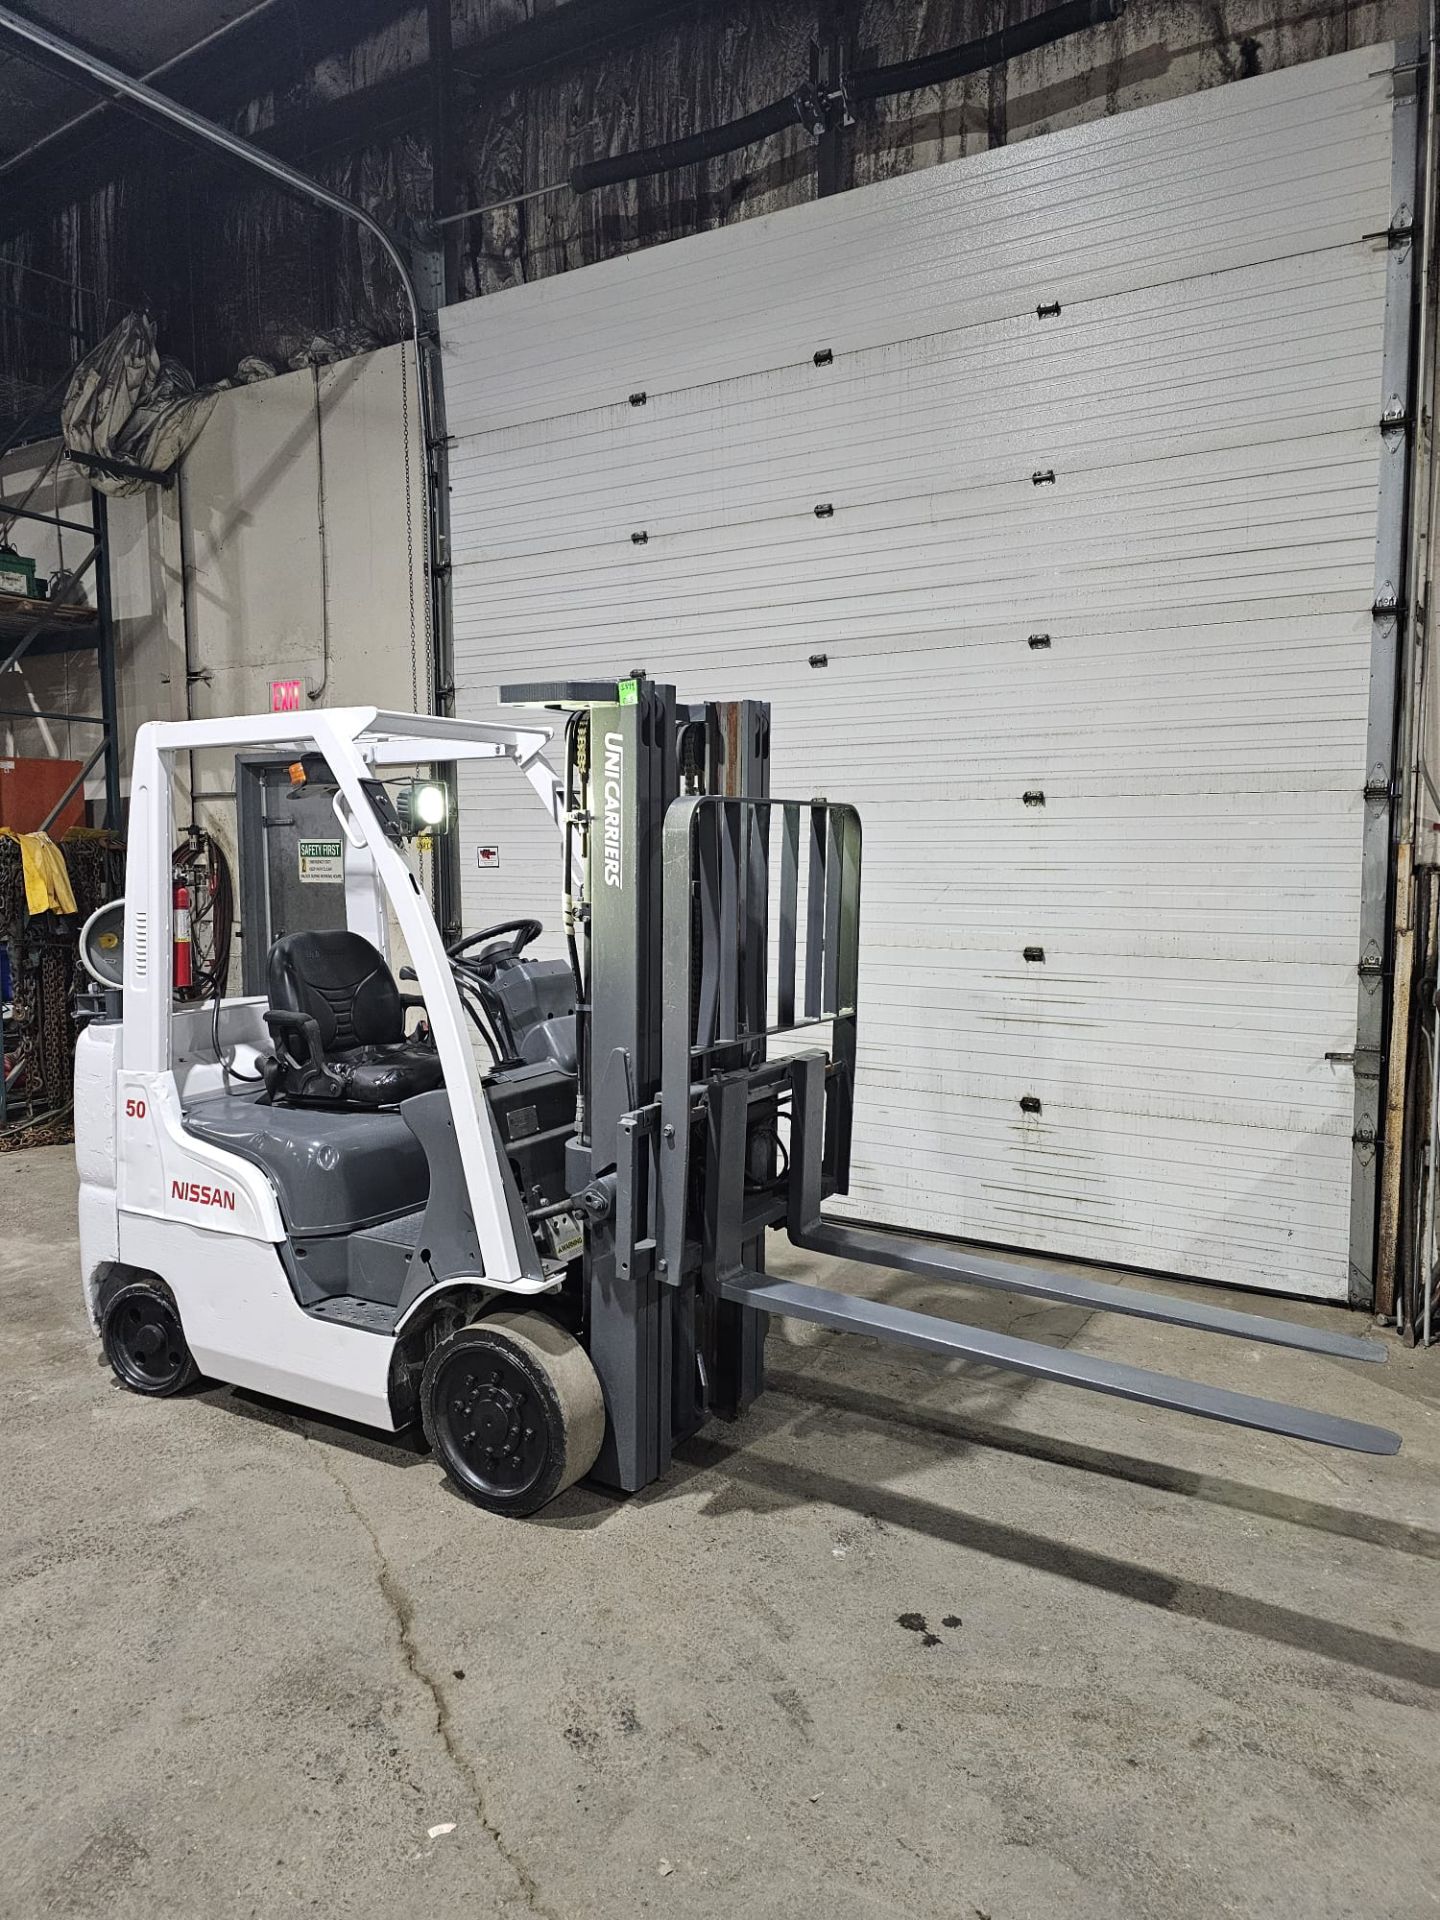 2015 Nissan 5000lbs Capacity LPG (Propane) Forklift 3-STAGE MAST with sideshift (no propane tank - Image 2 of 5